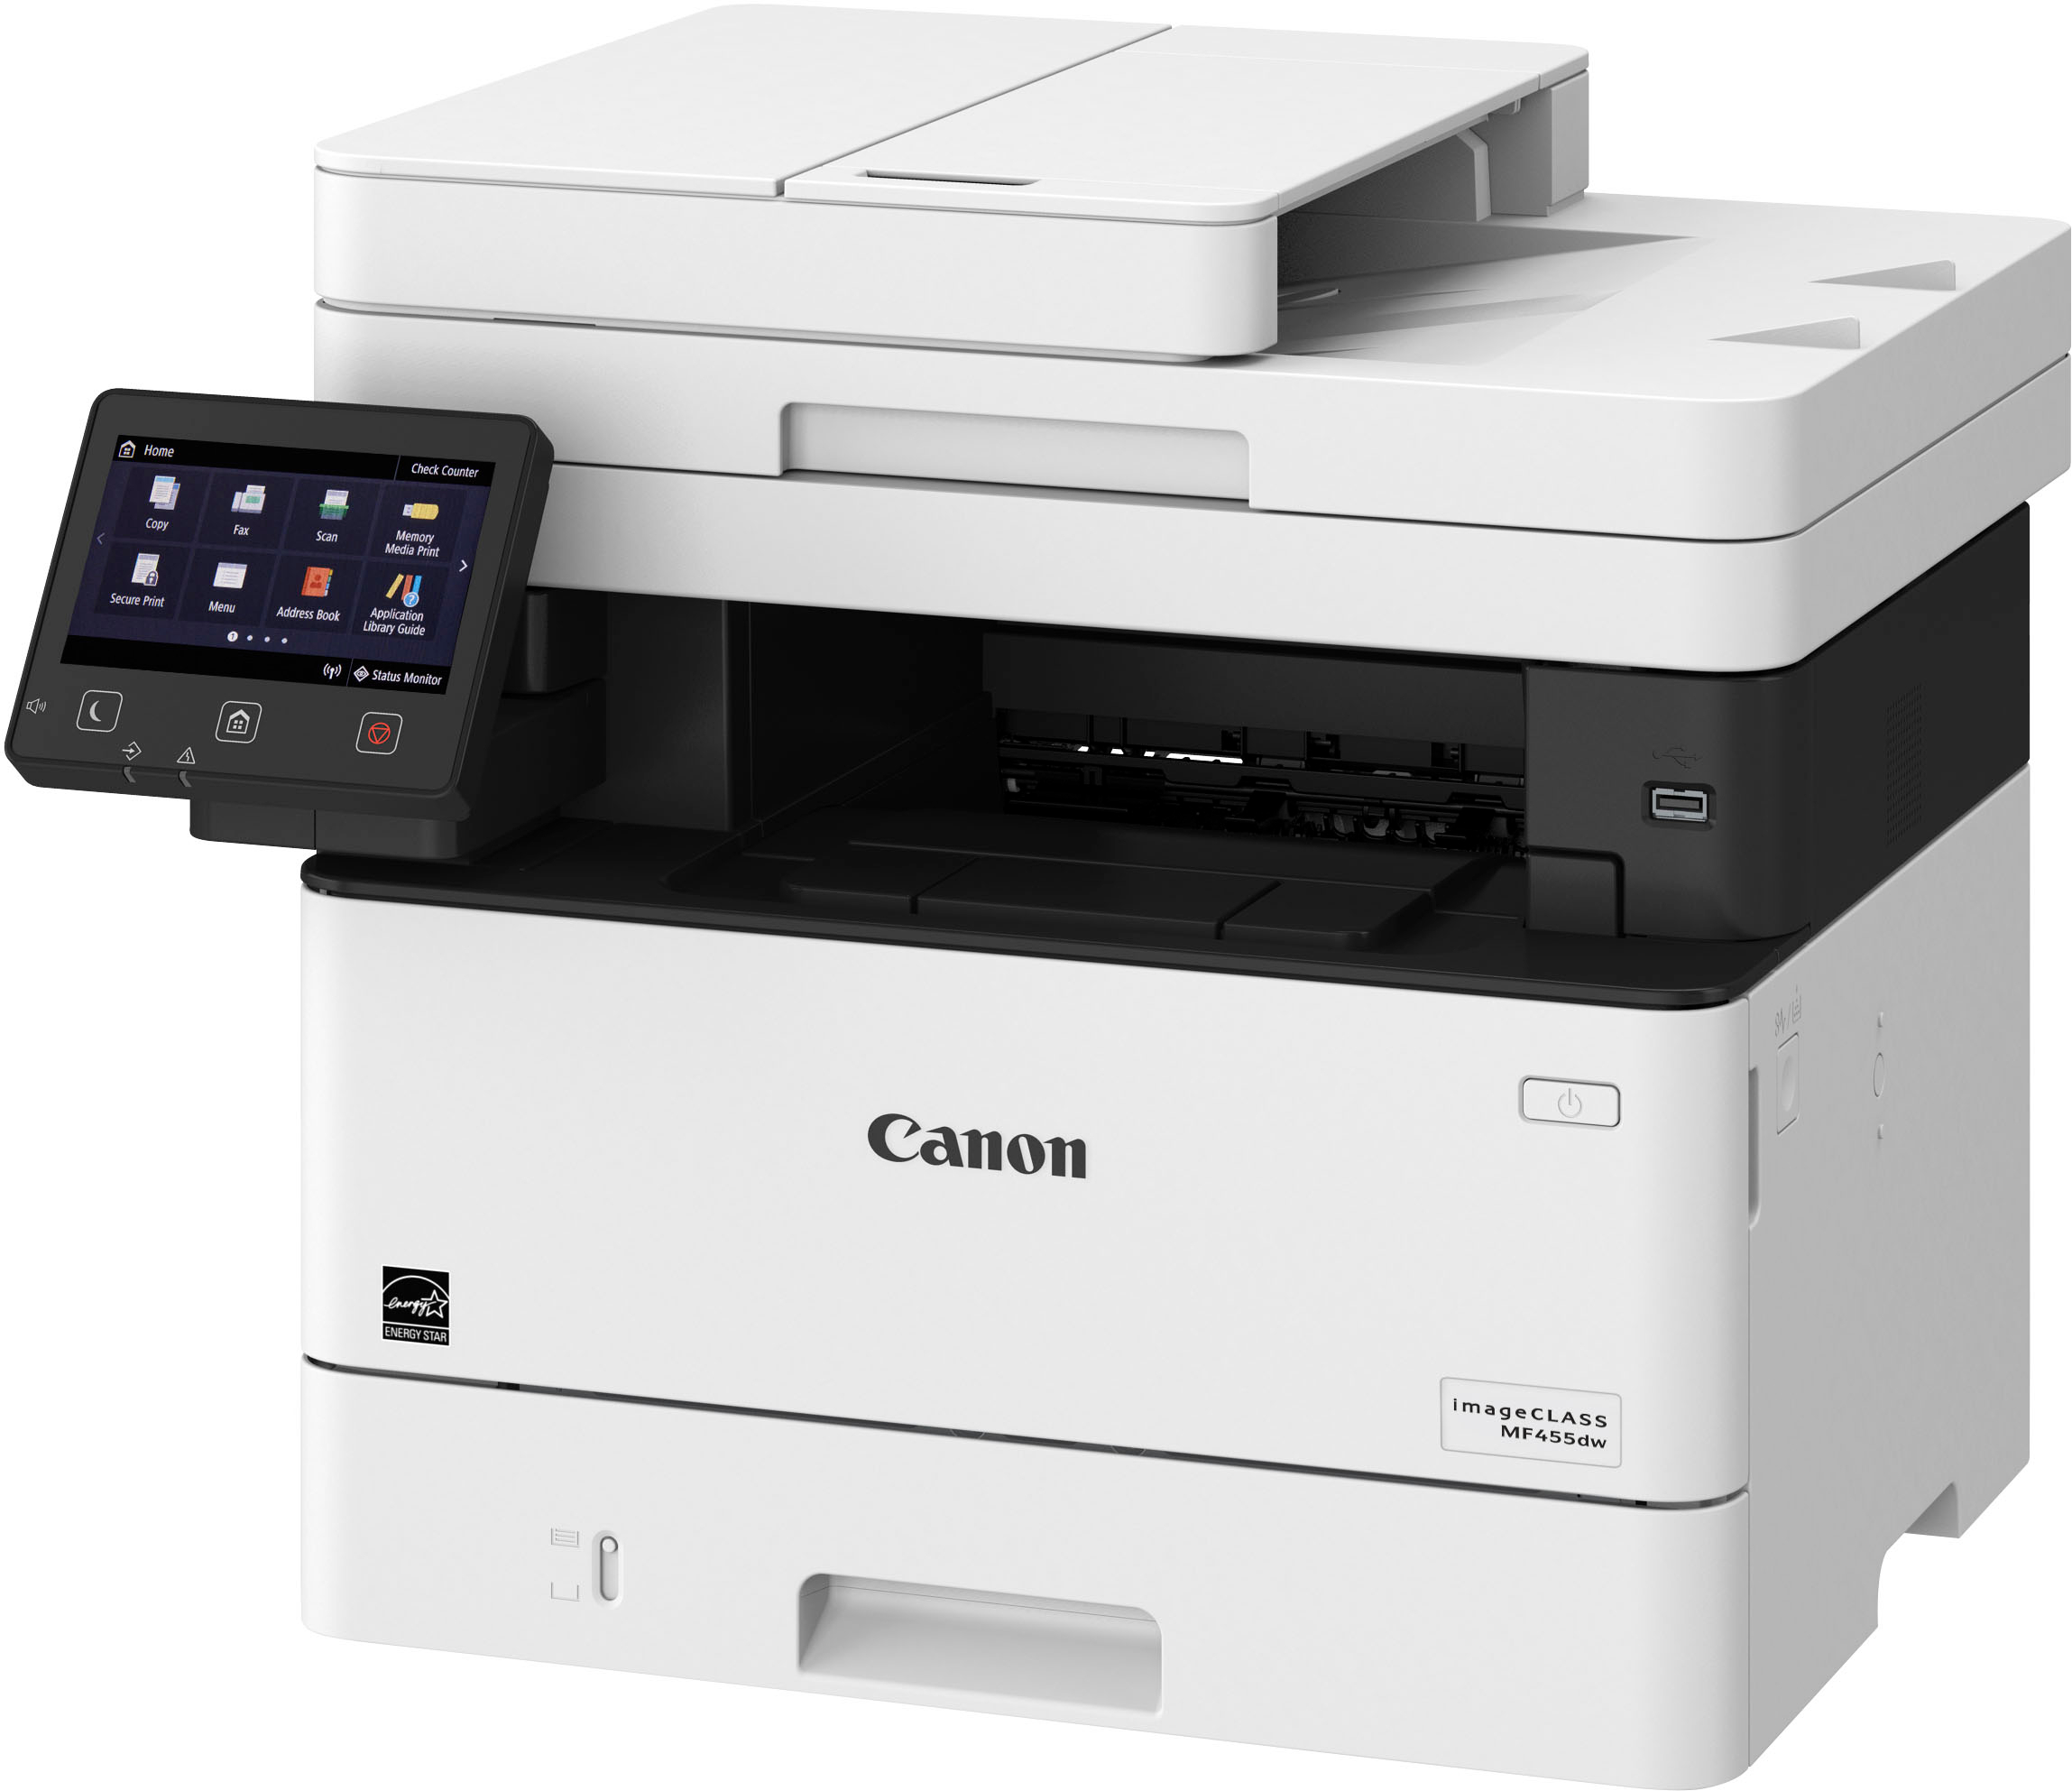 Angle View: Canon - imageCLASS MF455dw Wireless Black-and-White All-In-One Laser Printer with Fax - White